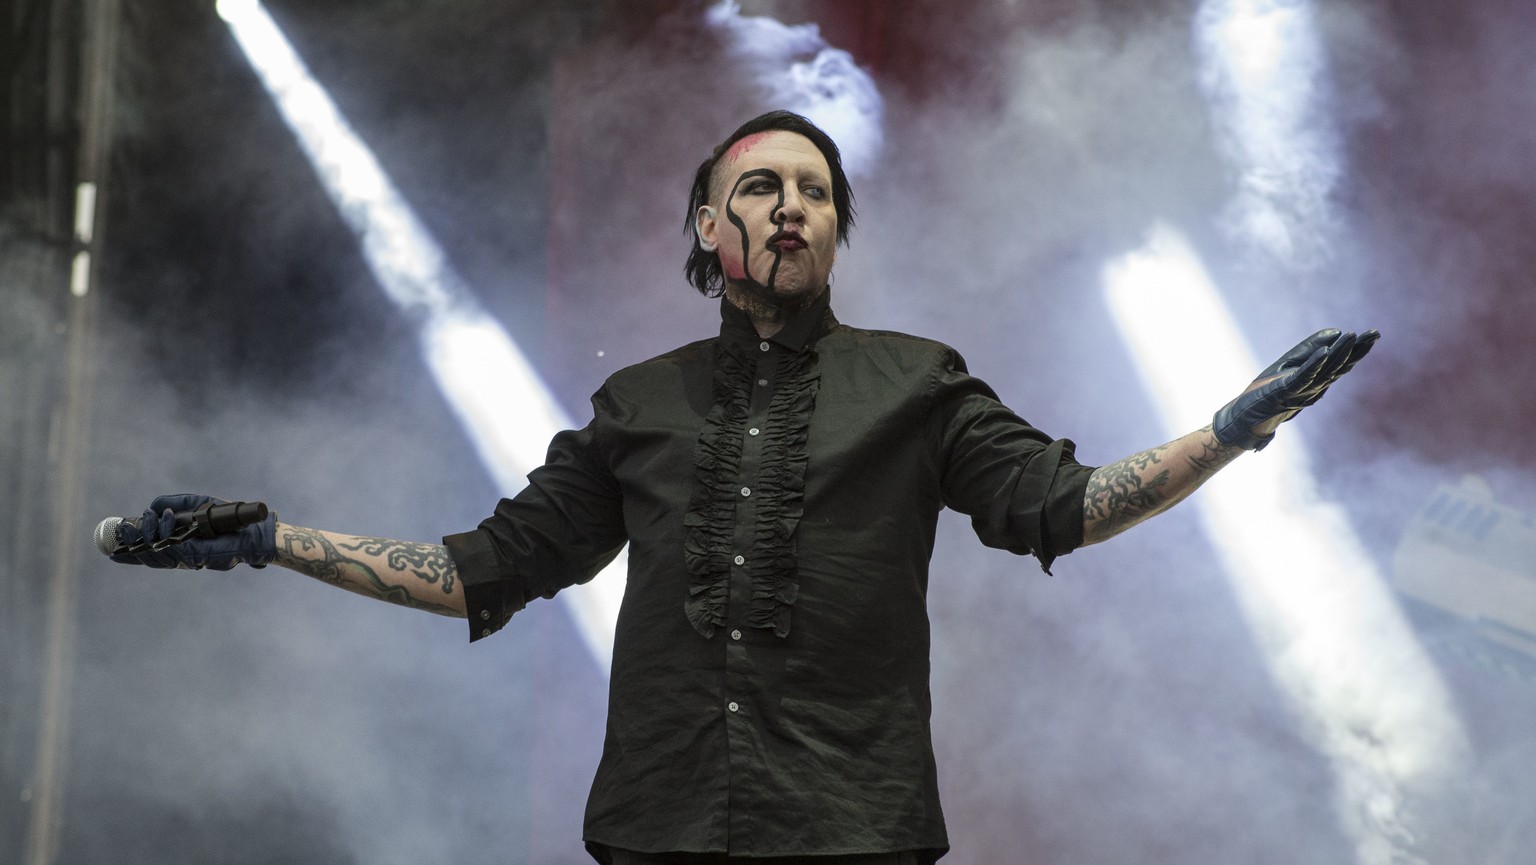 U.S. singer Marilyn Manson performs at the Hell and Heaven music festival in Mexico City, Saturday, May 5, 2018. (AP Photo/Christian Palma)